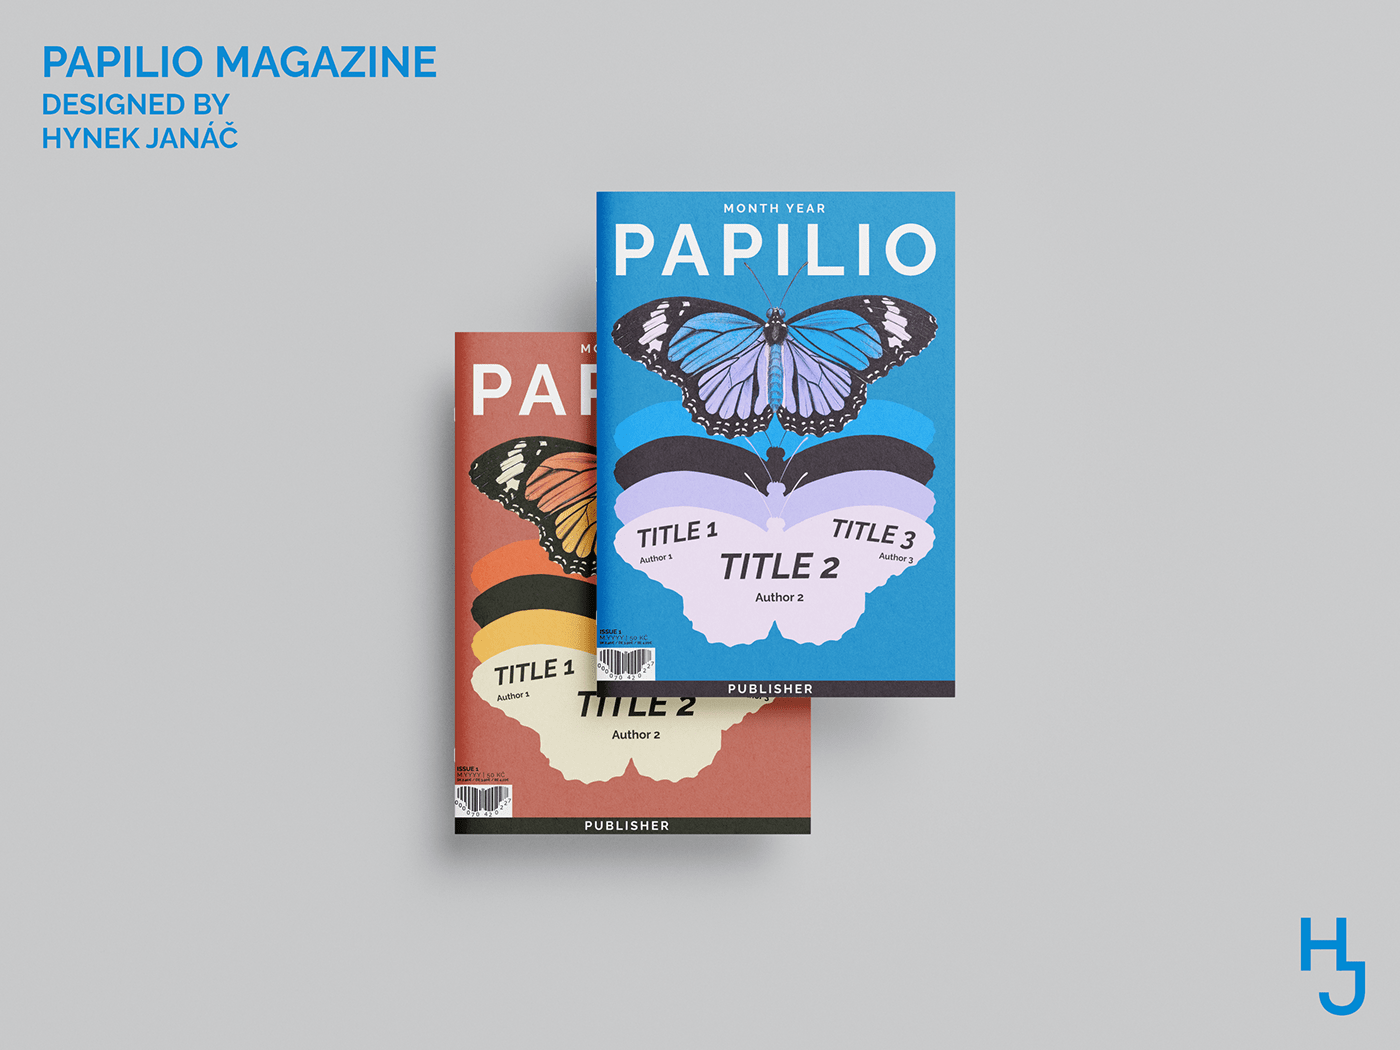 Red and blue magazine covers with big butterflyies and PAPILIO text